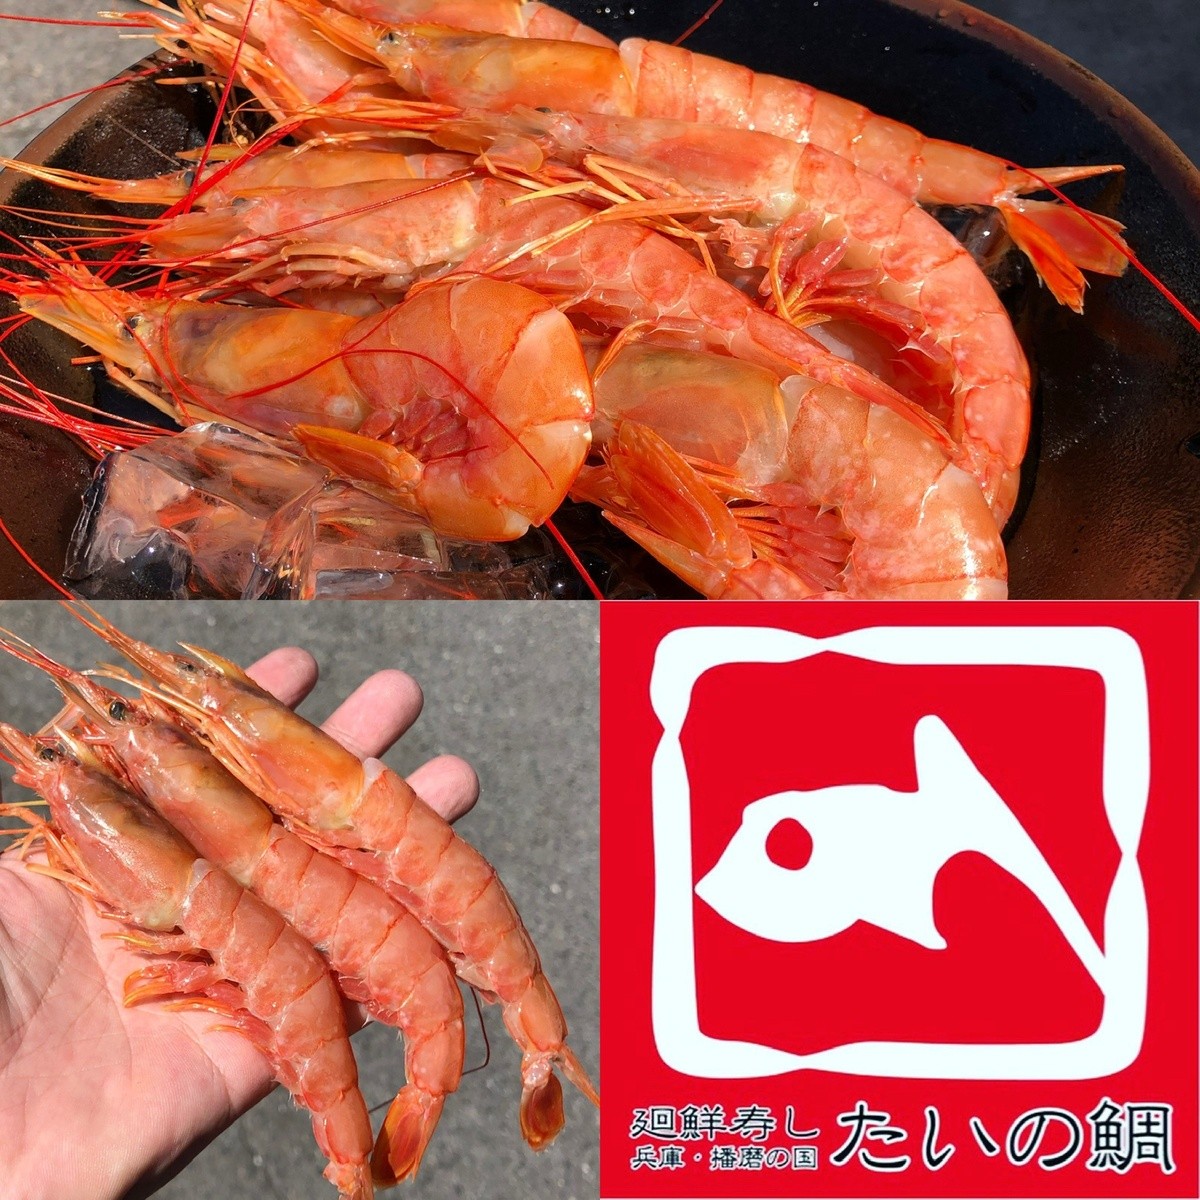  shrimp red shrimp 2kg sea . barbecue sashimi for have head Argentina production red sea .L3 sushi raw meal business use 